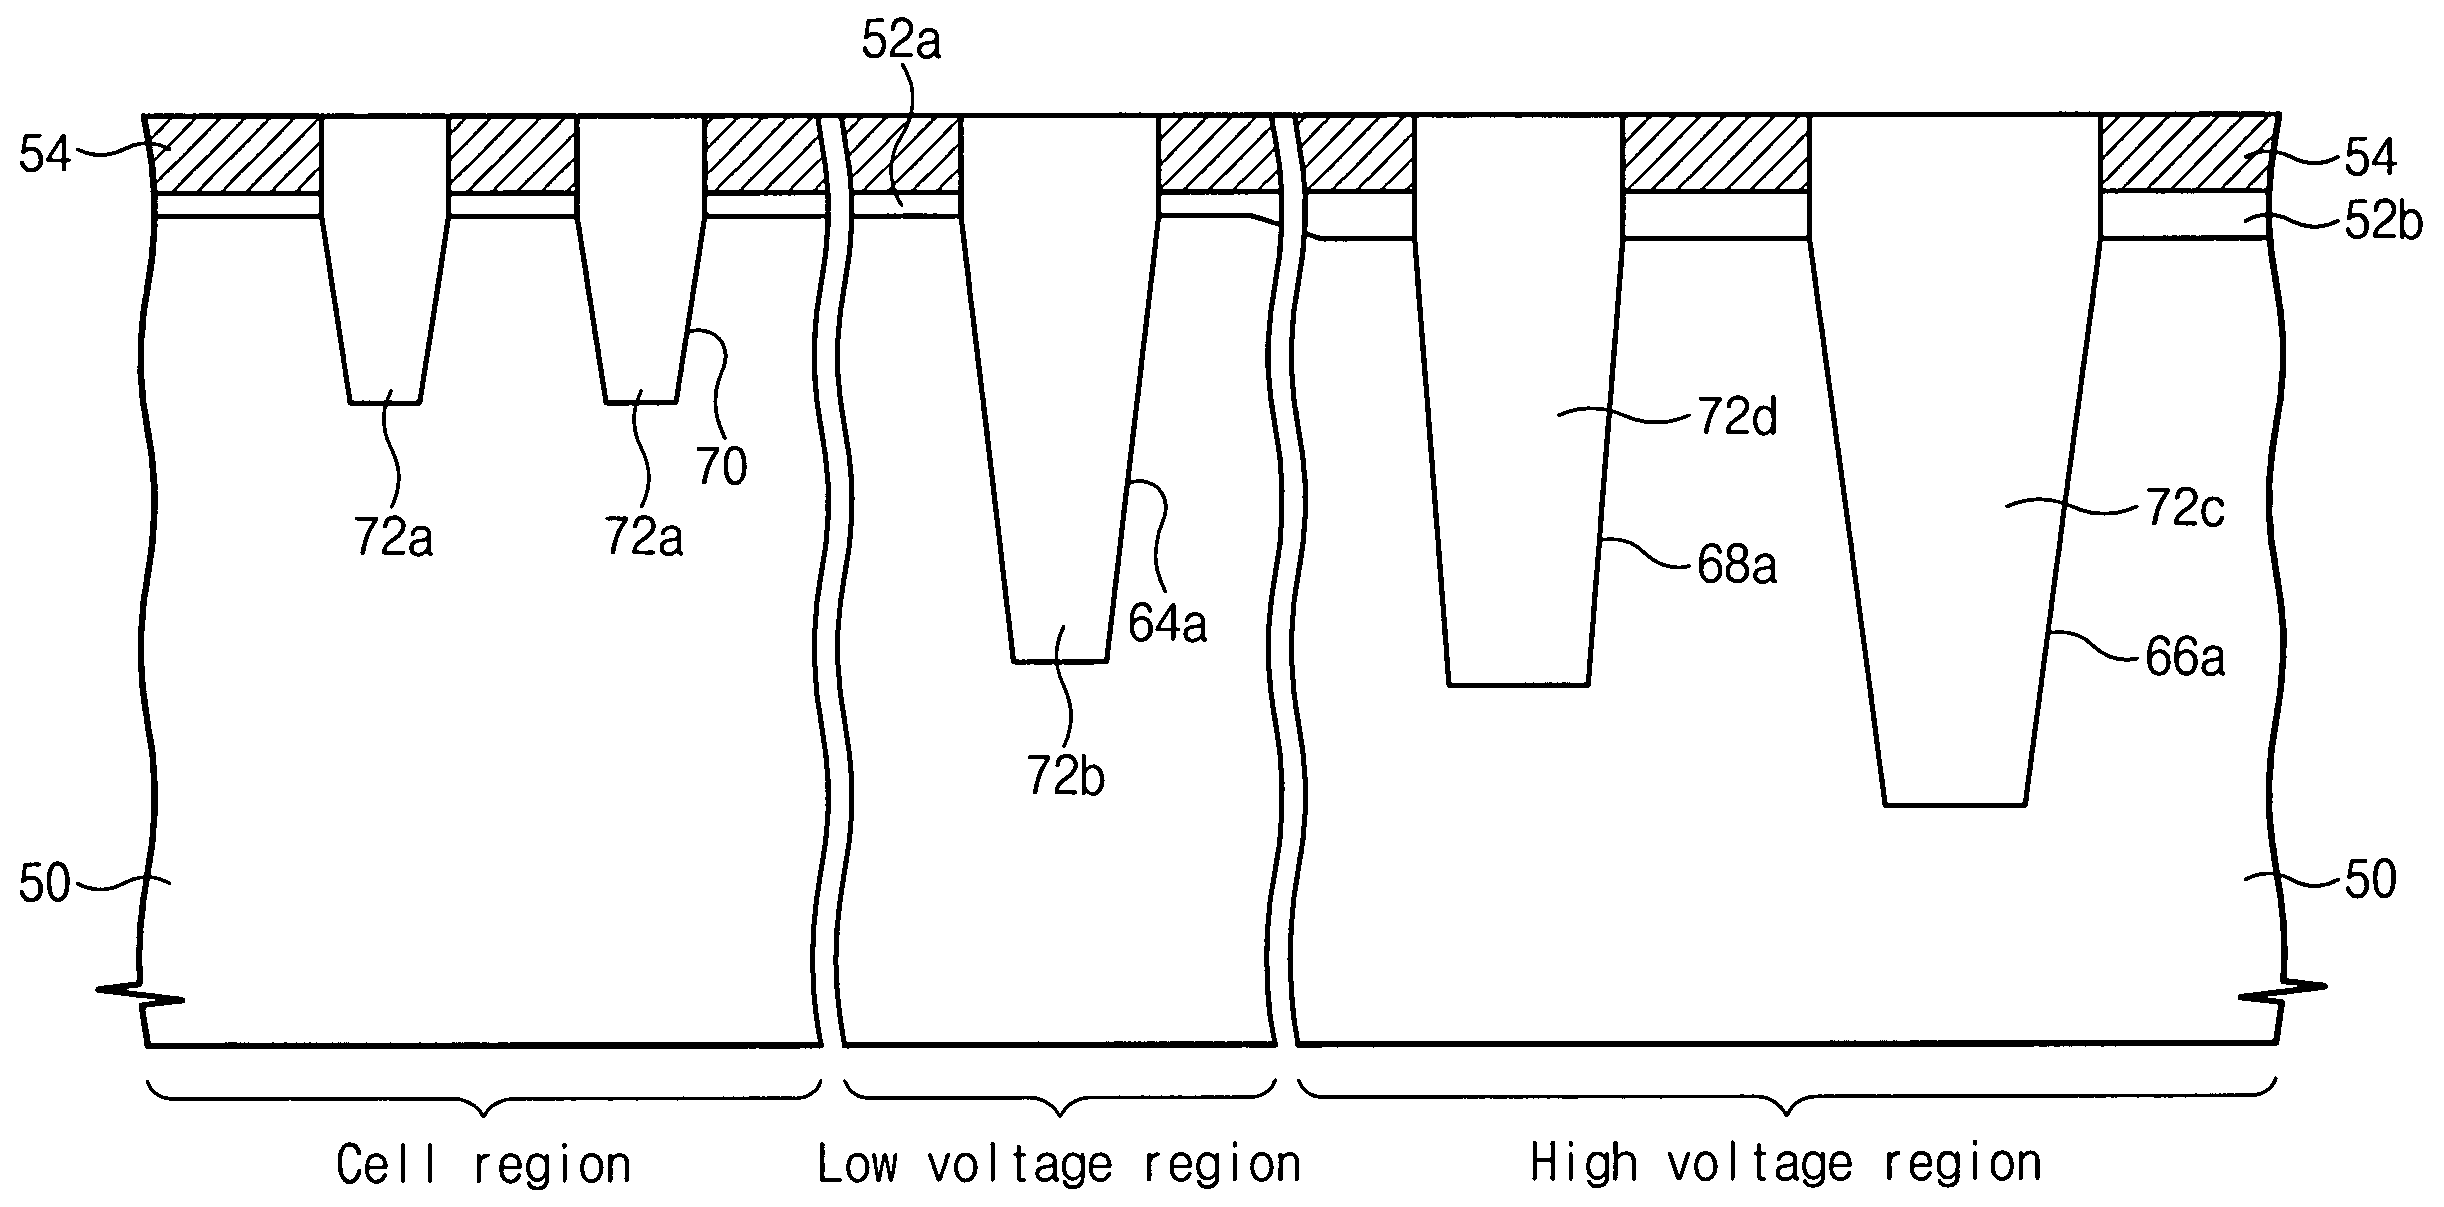 Methods of fabricating trench isolation structures having varying depth